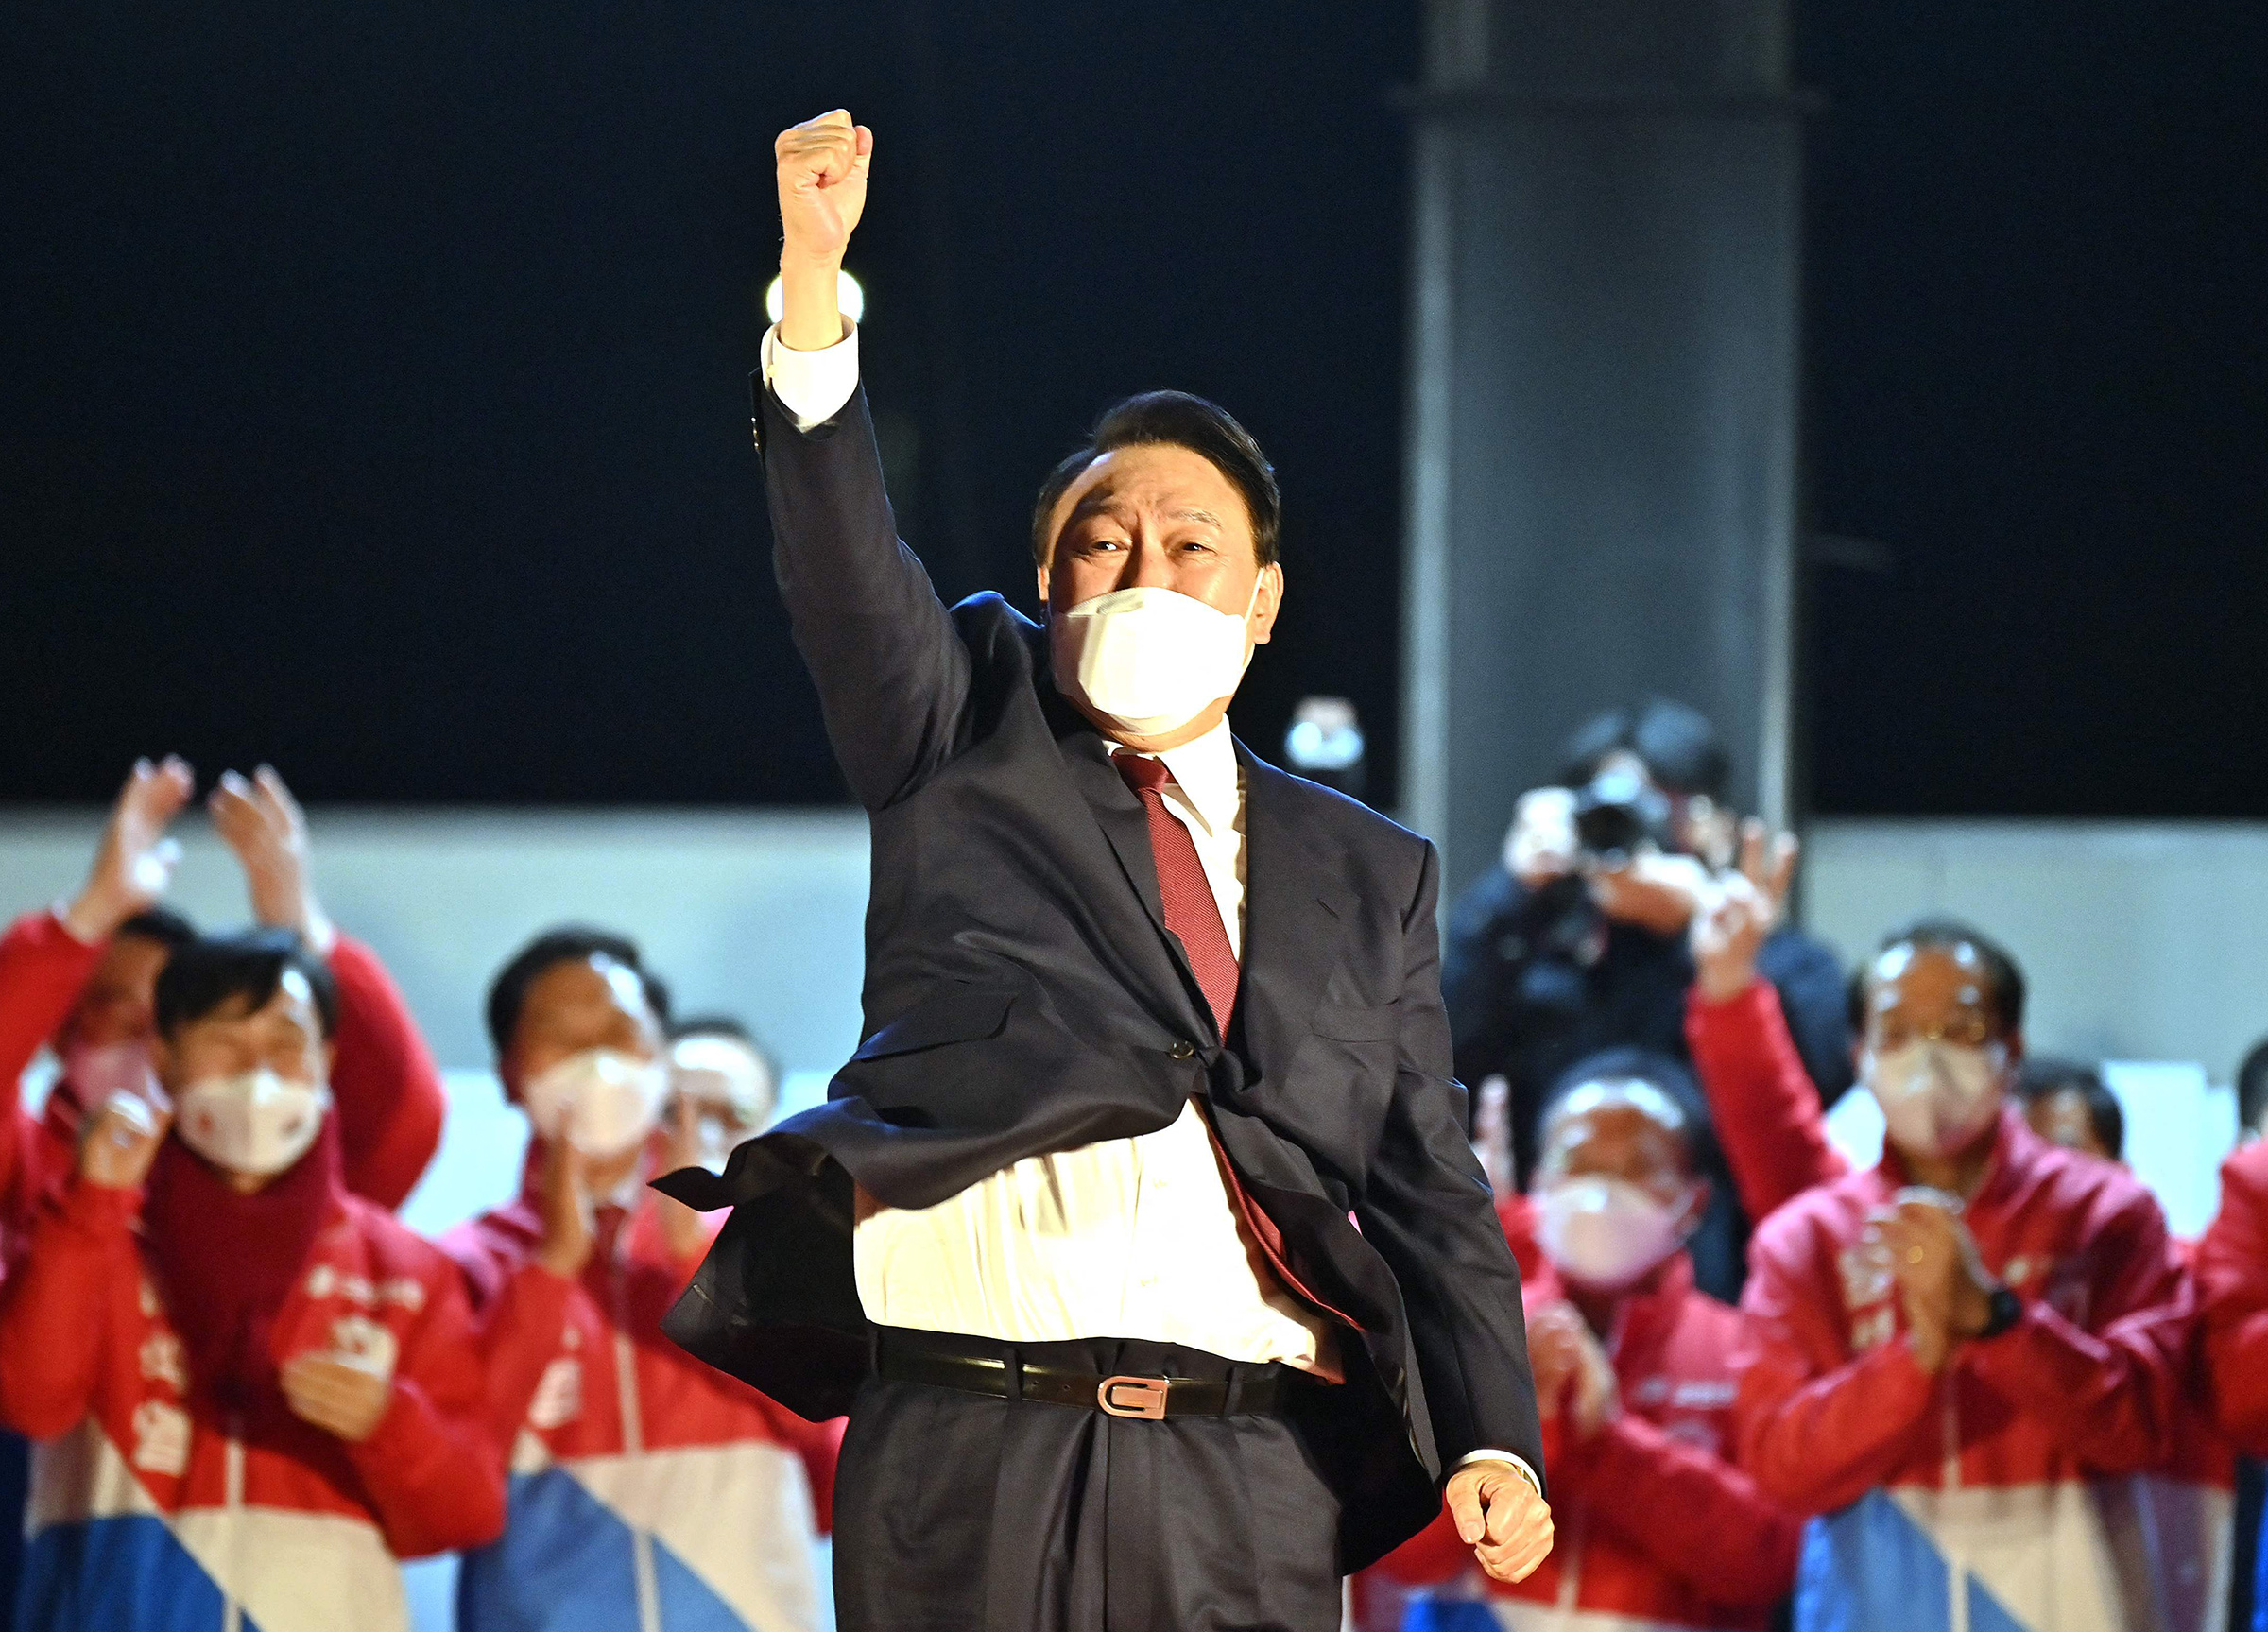 South Korea's new president-elect Yoon Suk Yeol, of the People Power Party, gestures to his supporters as he is congratulated outside the party headquarters in Seoul on March 10, 2022. (Jung Yeon-je—AFP/Getty Images)